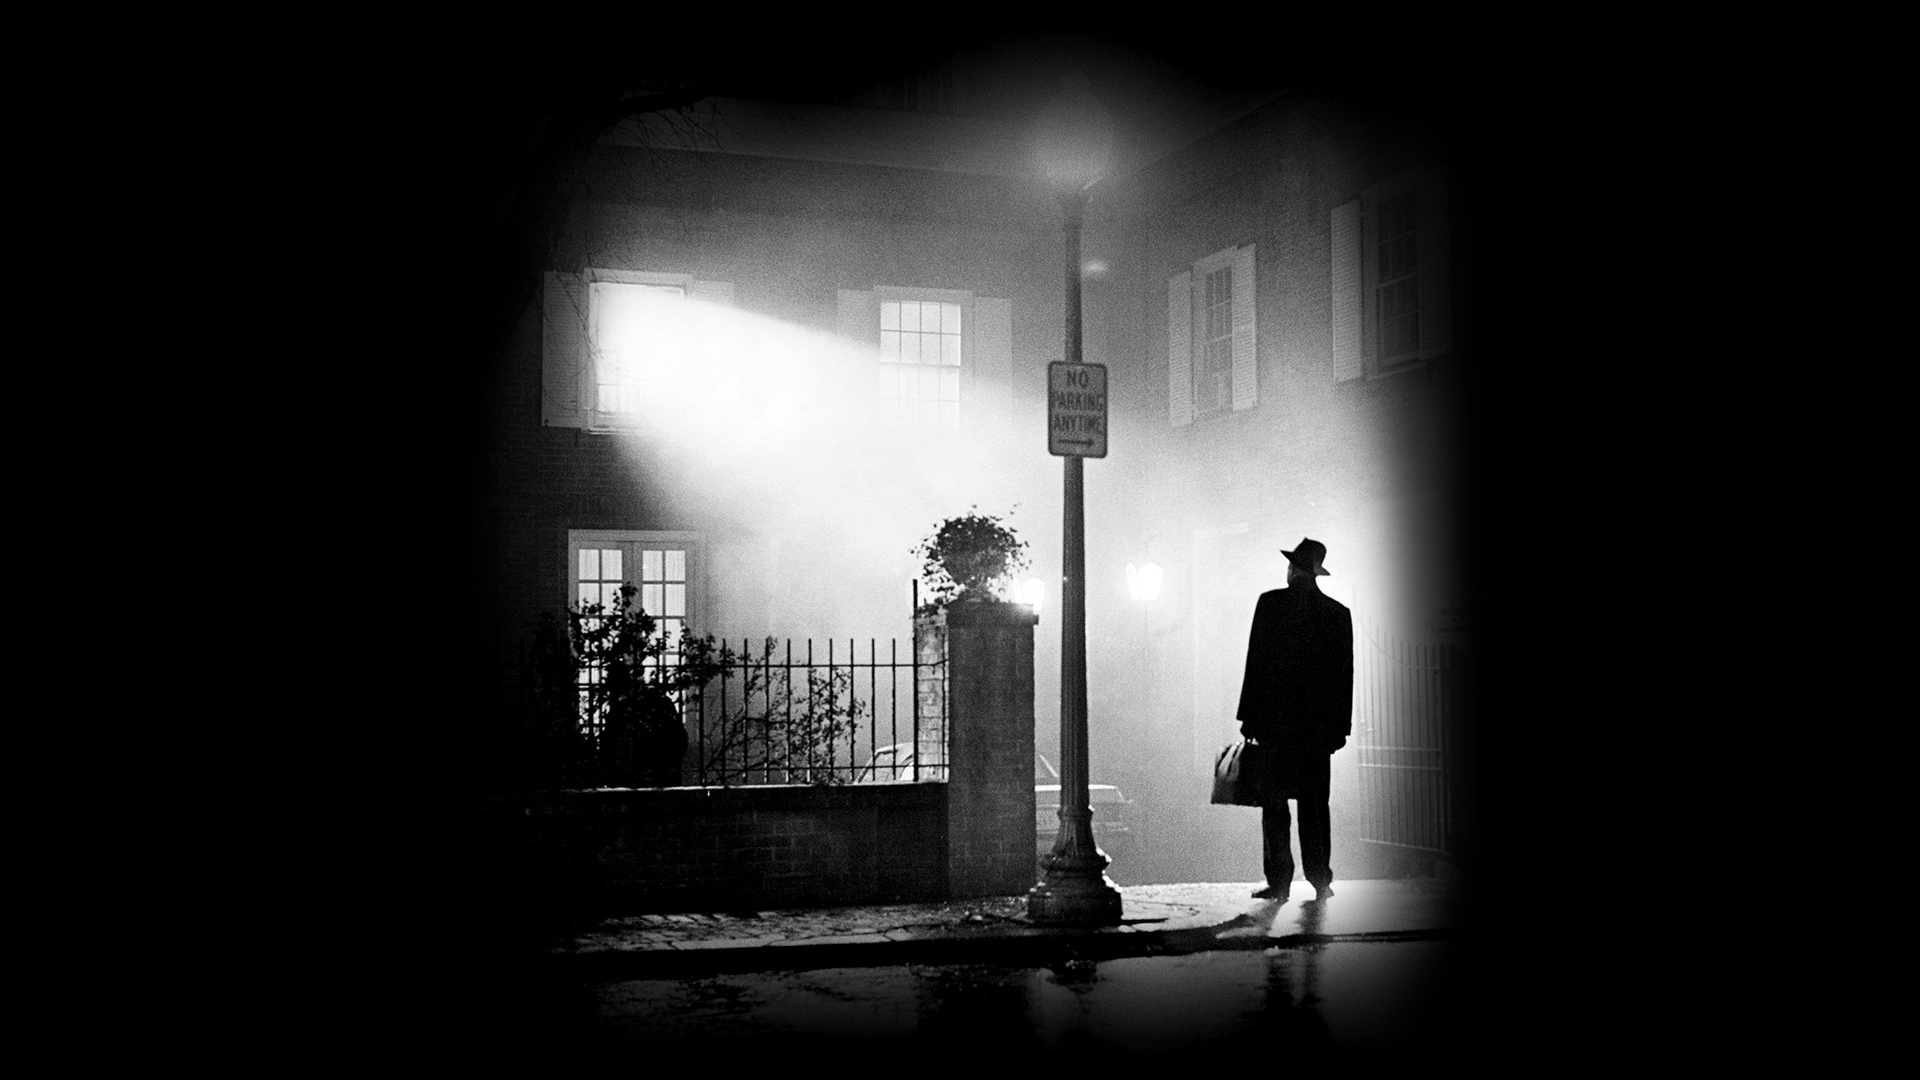 11 The Exorcist HD Wallpapers Backgrounds - Wallpaper Abyss